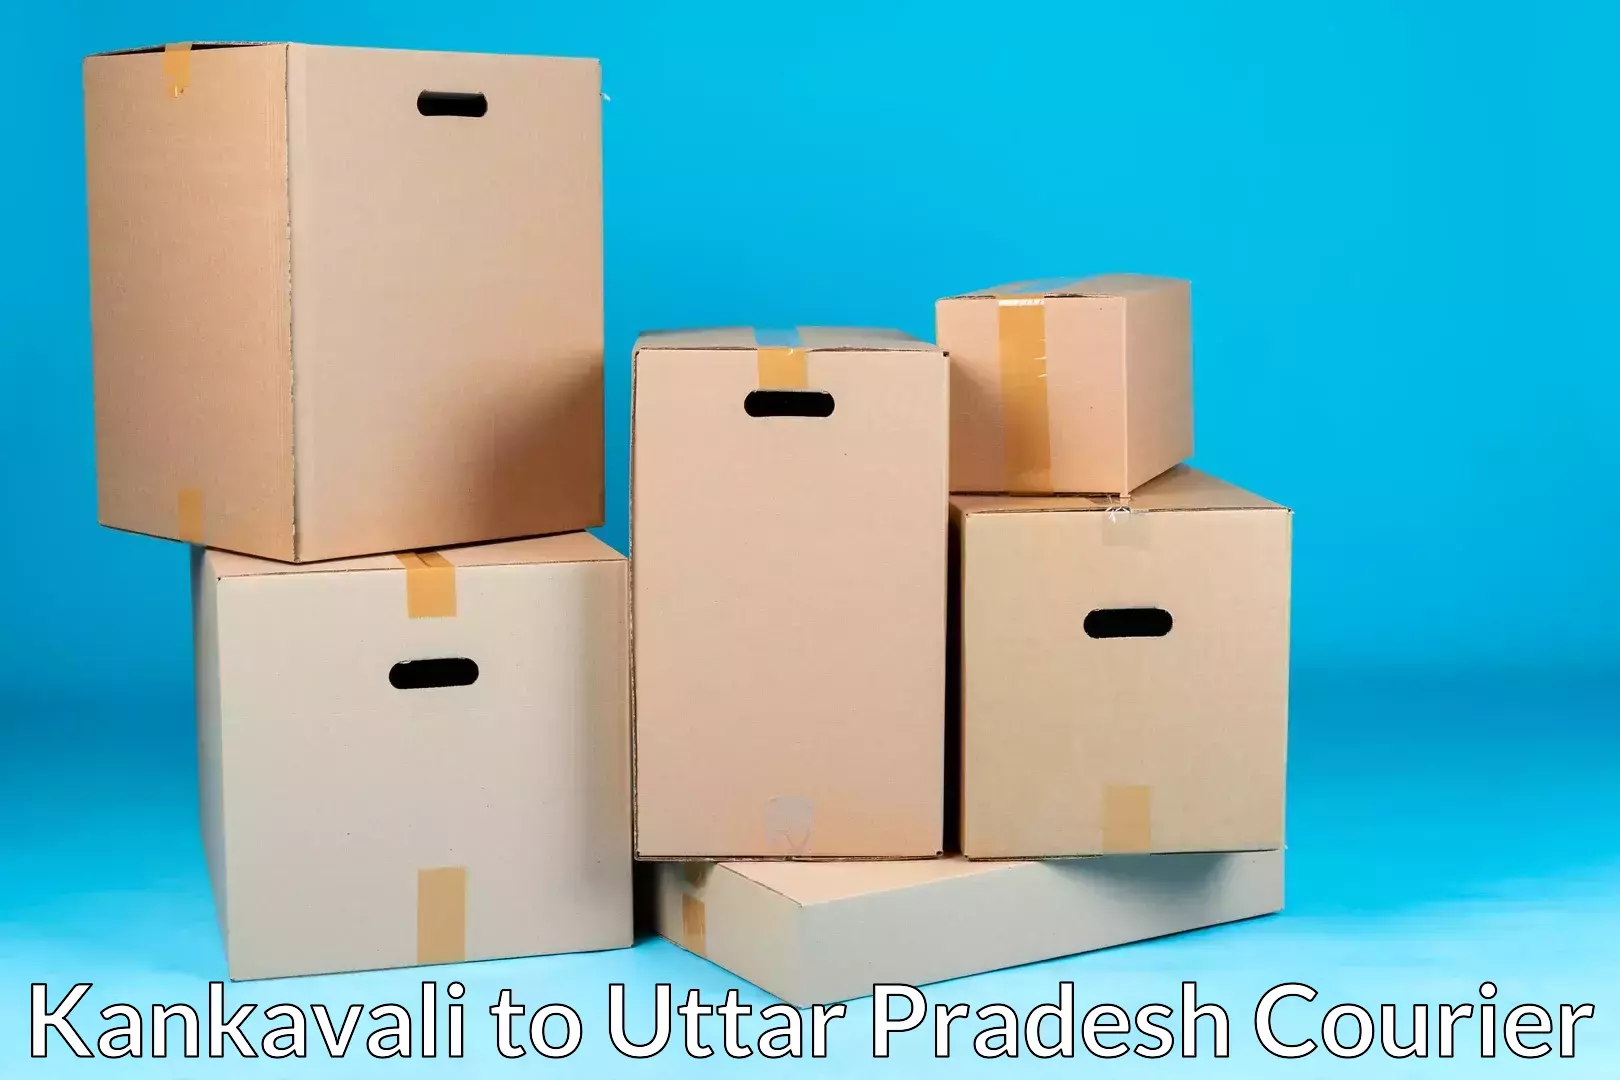 Flexible moving solutions Kankavali to Agra